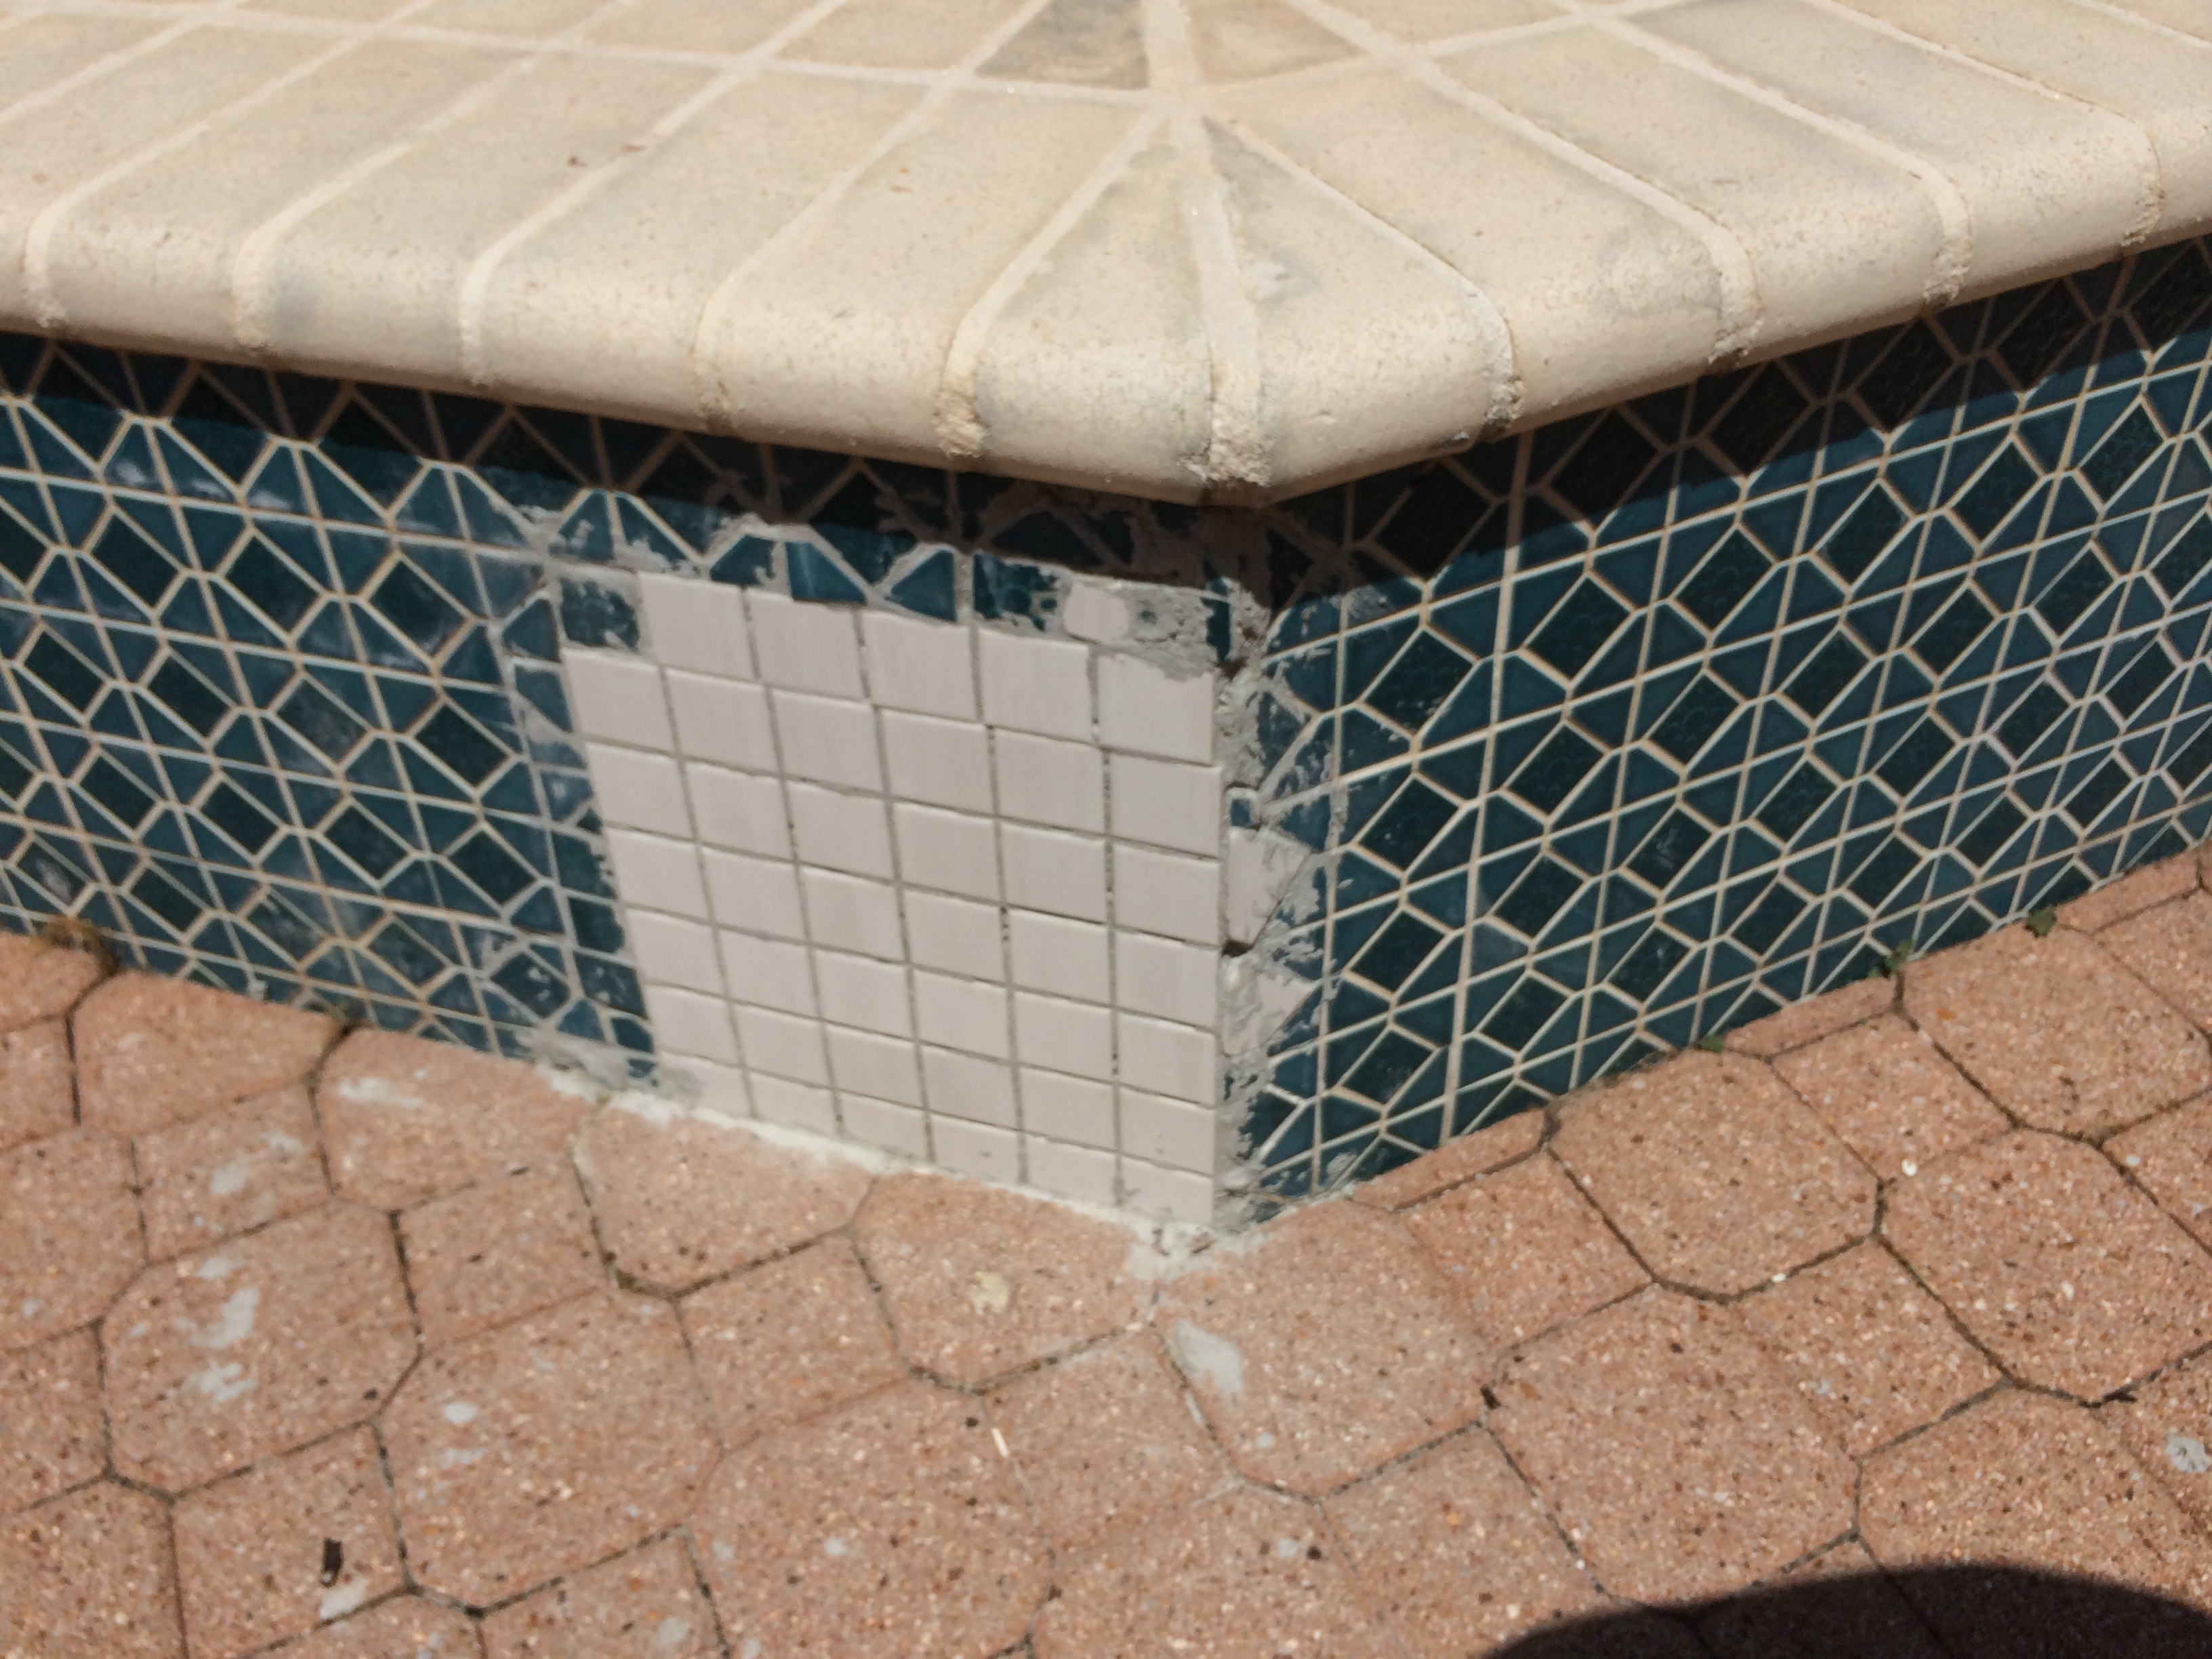 Pool tile repairs they made